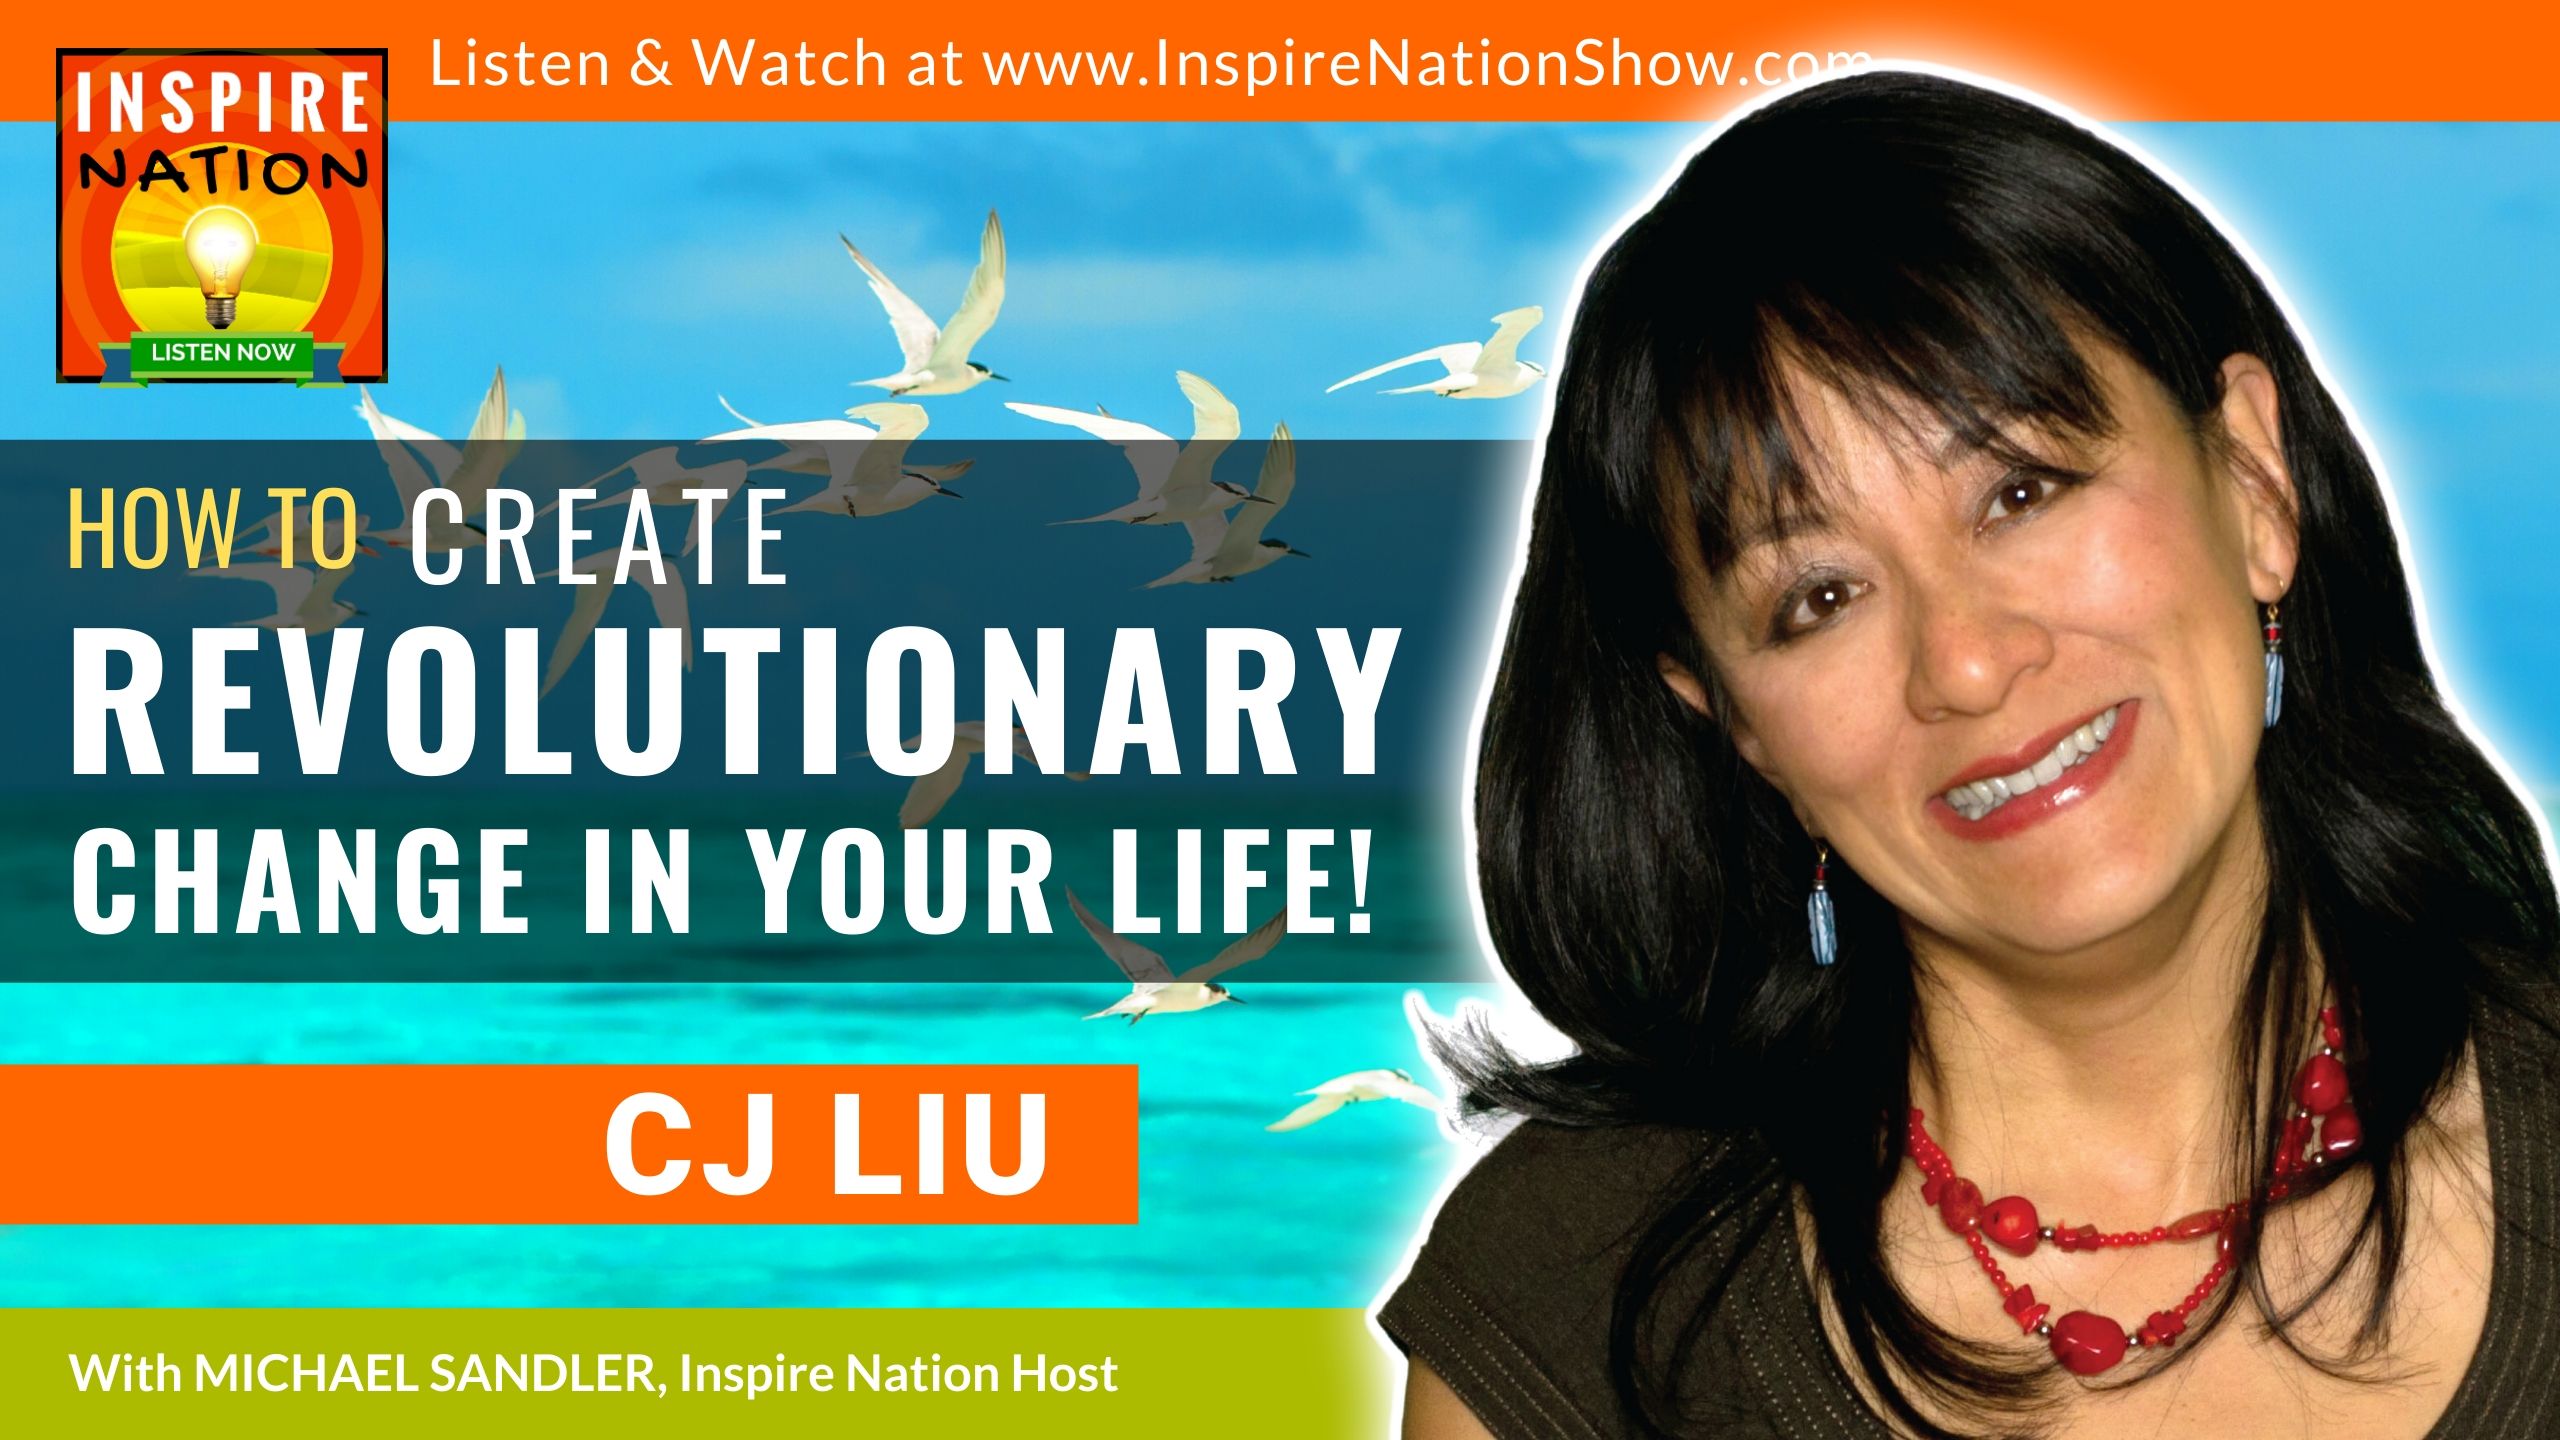 Michael Sandler and CJ Liu chat about what it takes to make revolutionary change in your life!